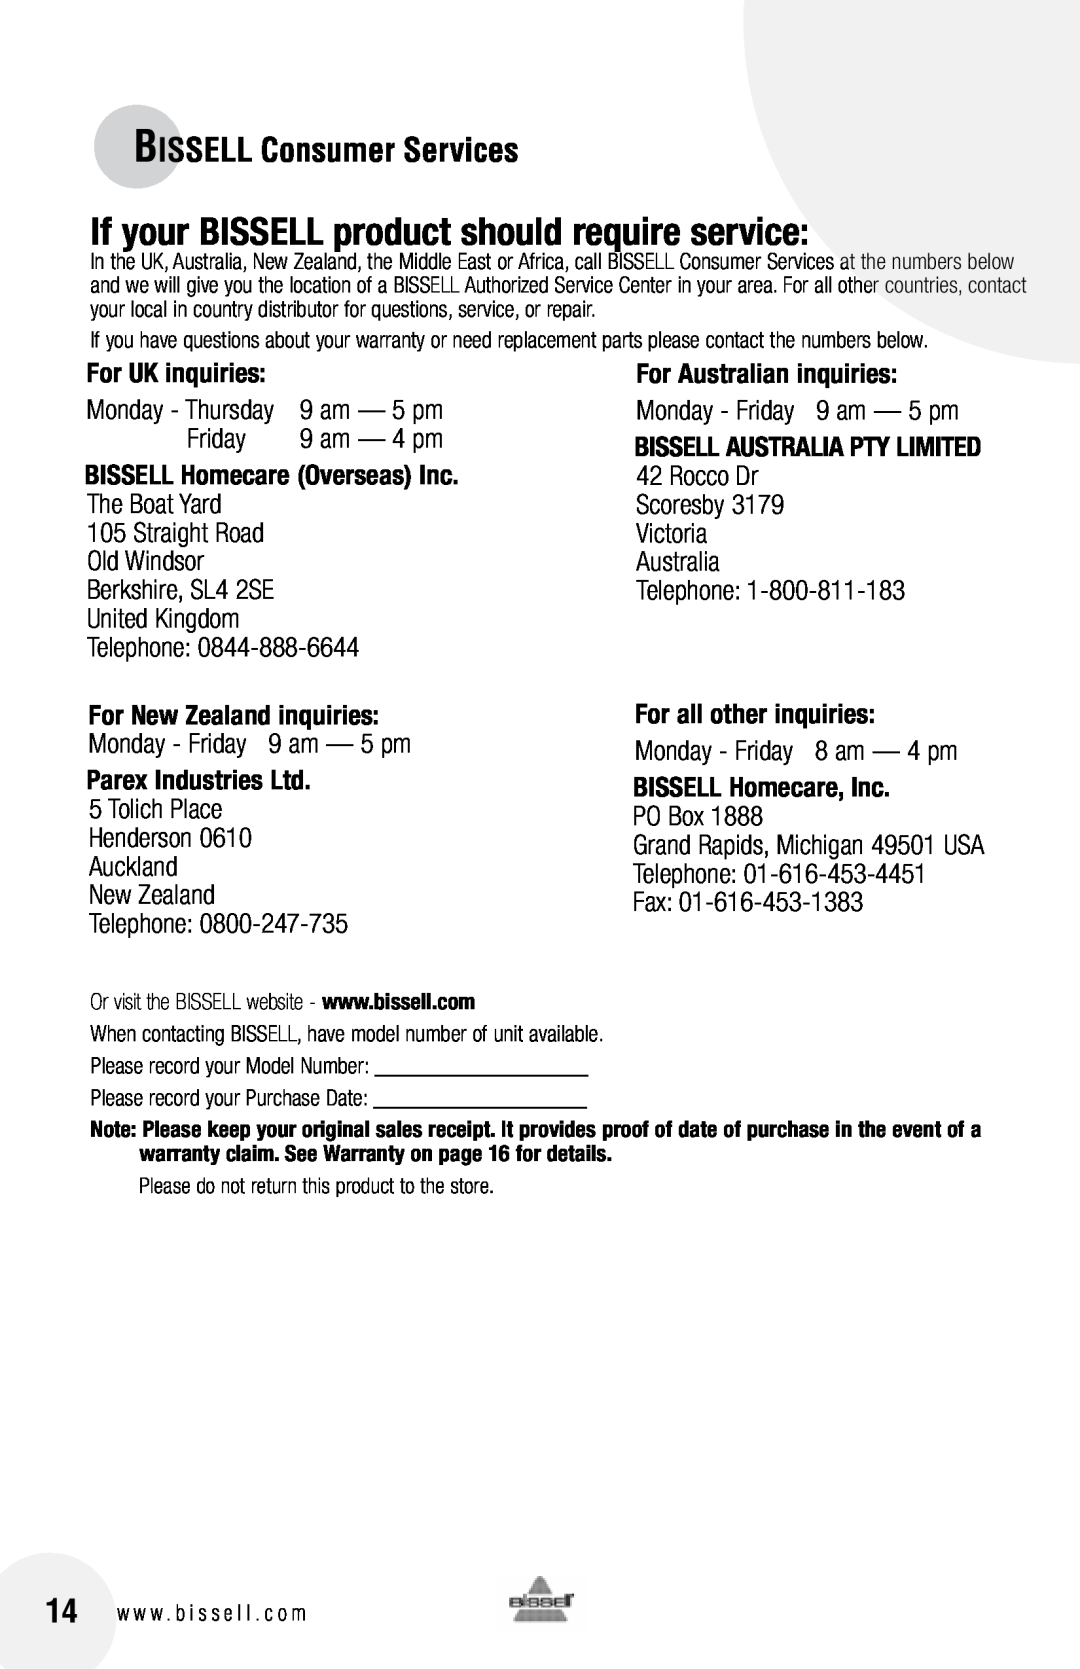 Bissell 81L8 warranty If your BISSELL product should require service, BISSELL Consumer Services, For Australian inquiries 